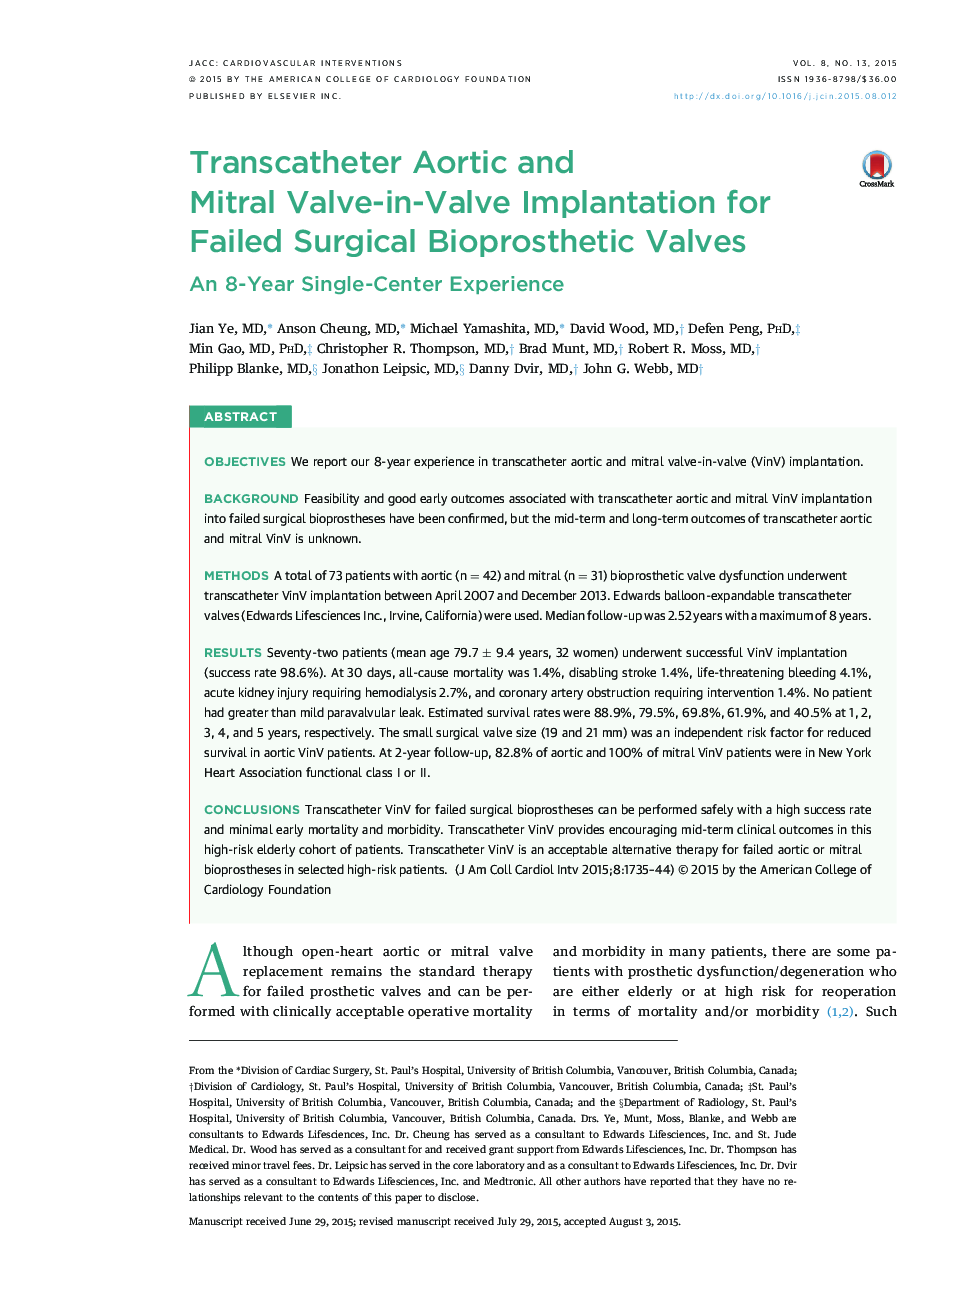 Transcatheter Aortic and Mitral Valve-in-Valve Implantation for Failed Surgical Bioprosthetic Valves : An 8-Year Single-Center Experience